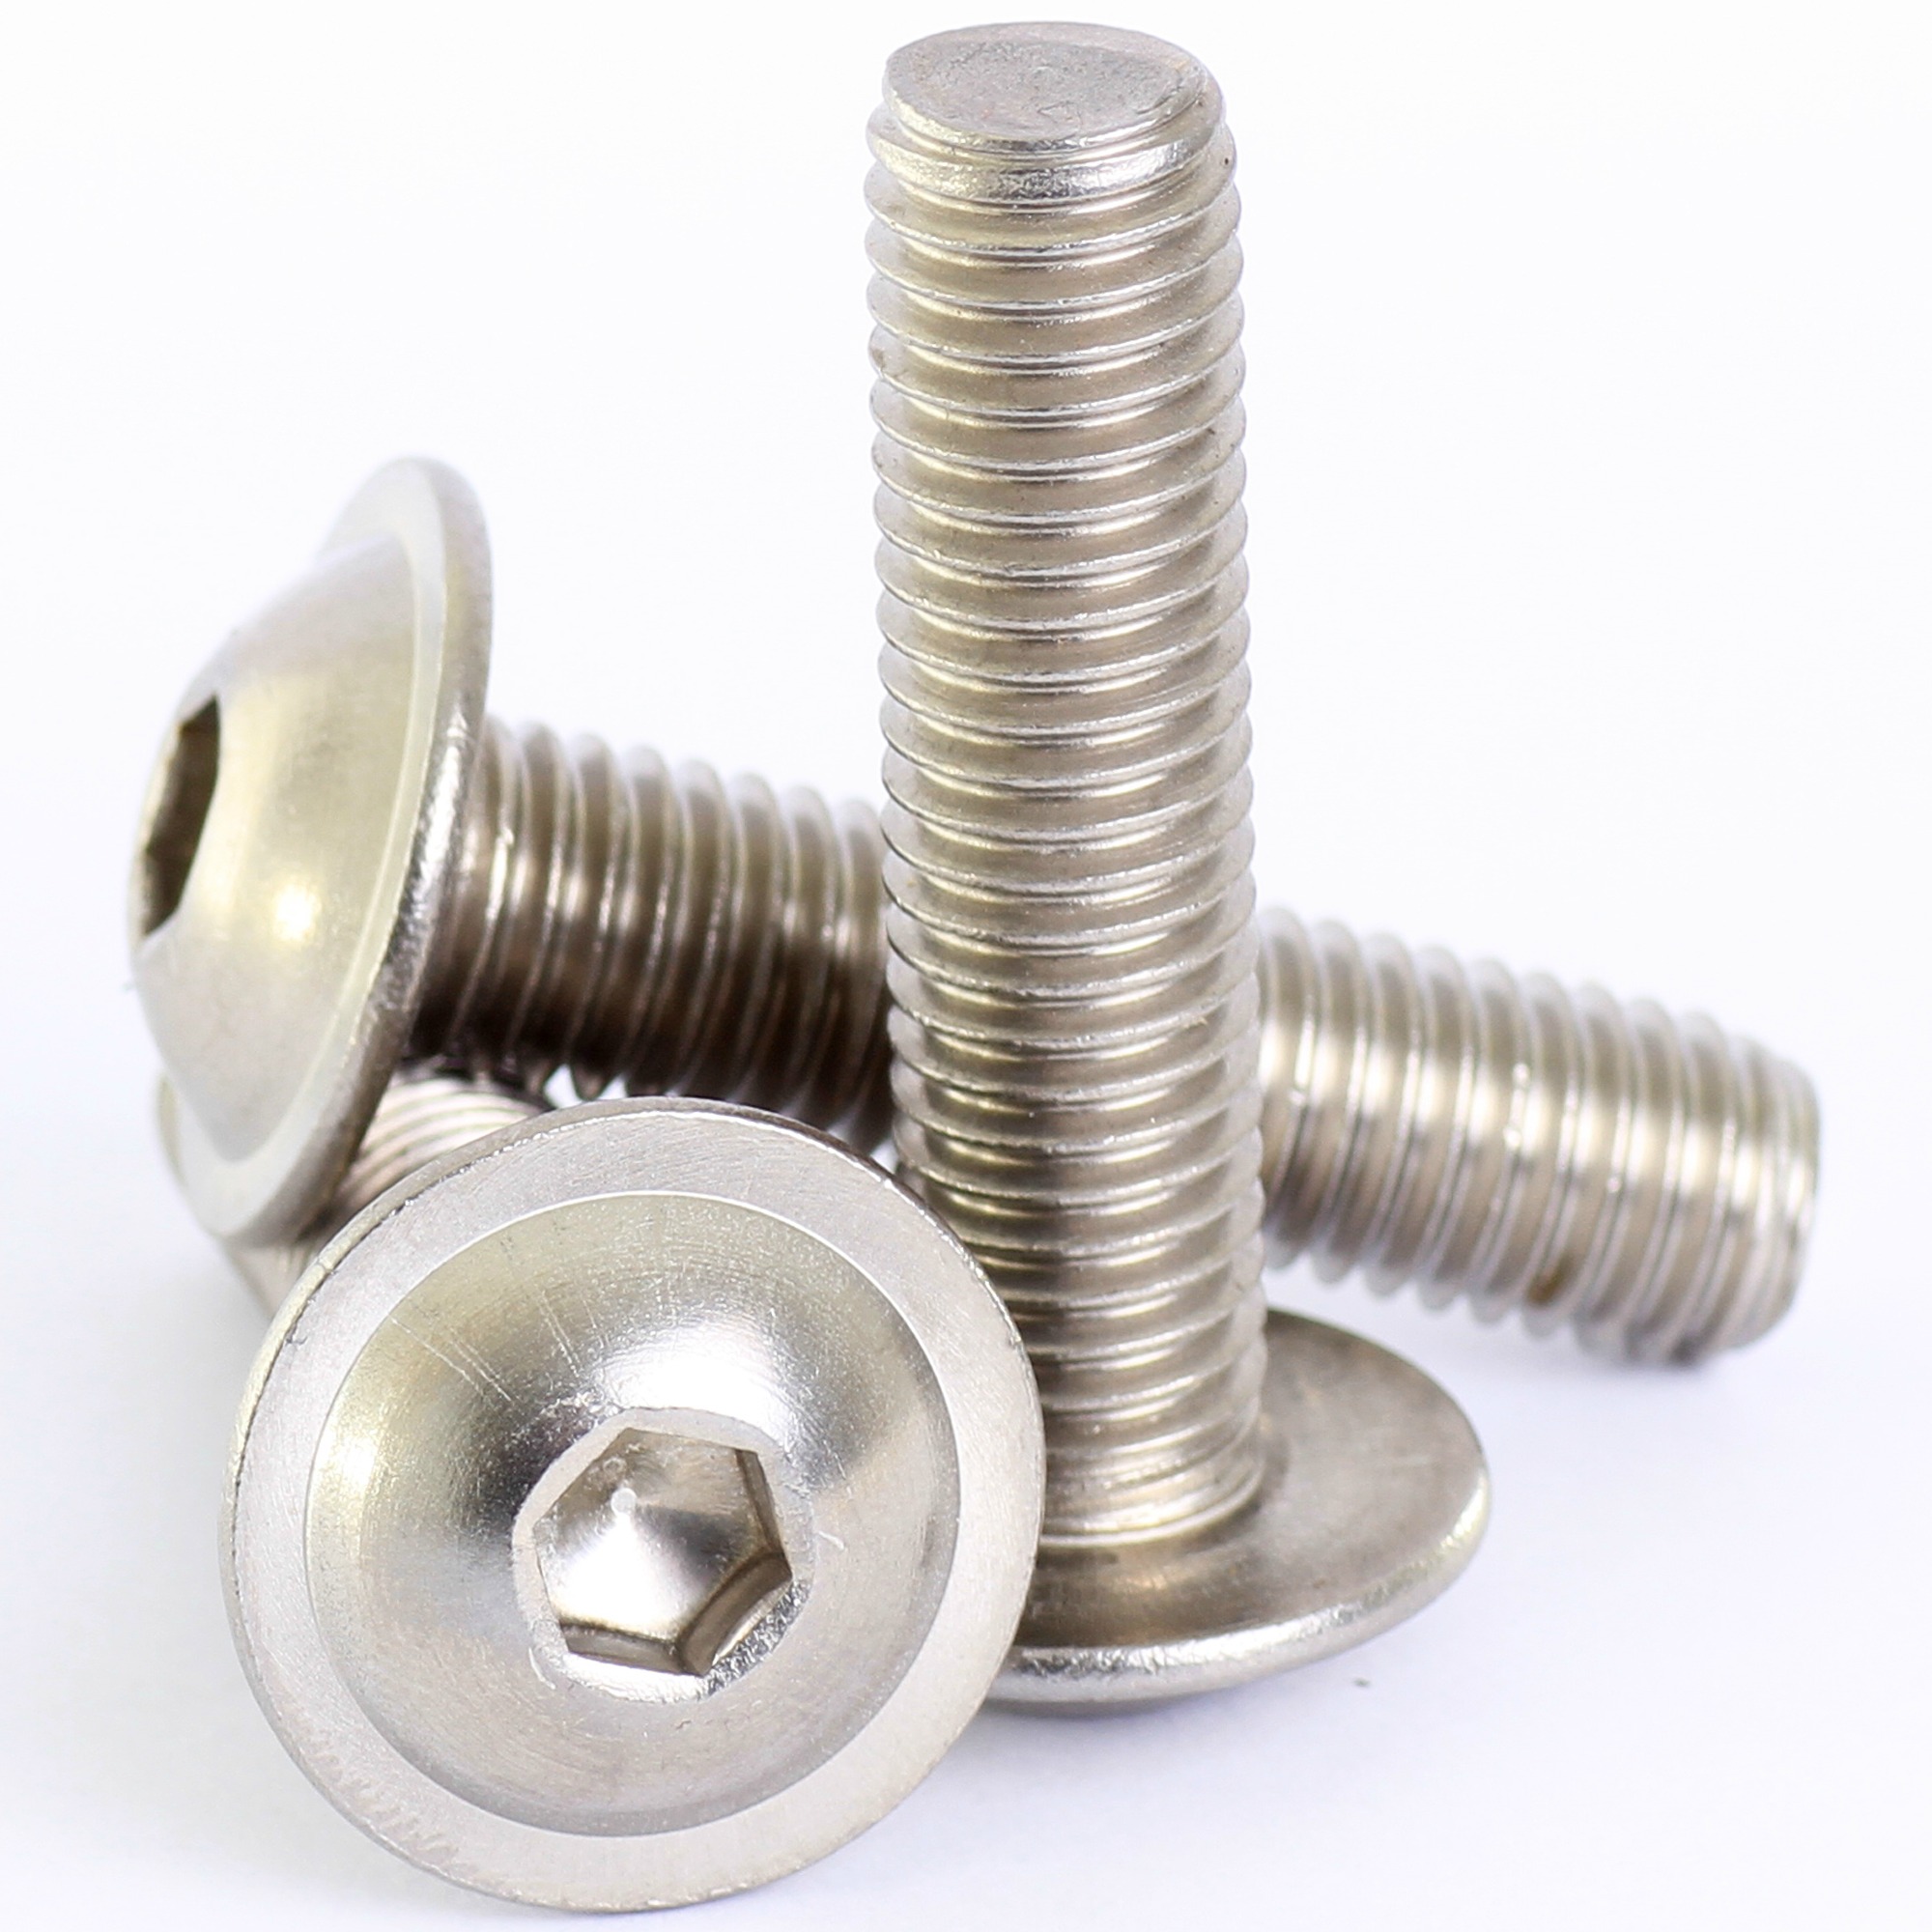 8mm M6 Flanged Hexagon Head Bolts Flange Hex Screws M5 M8 M8 x 16mm 50 Pack M10 A2 Stainless Steel